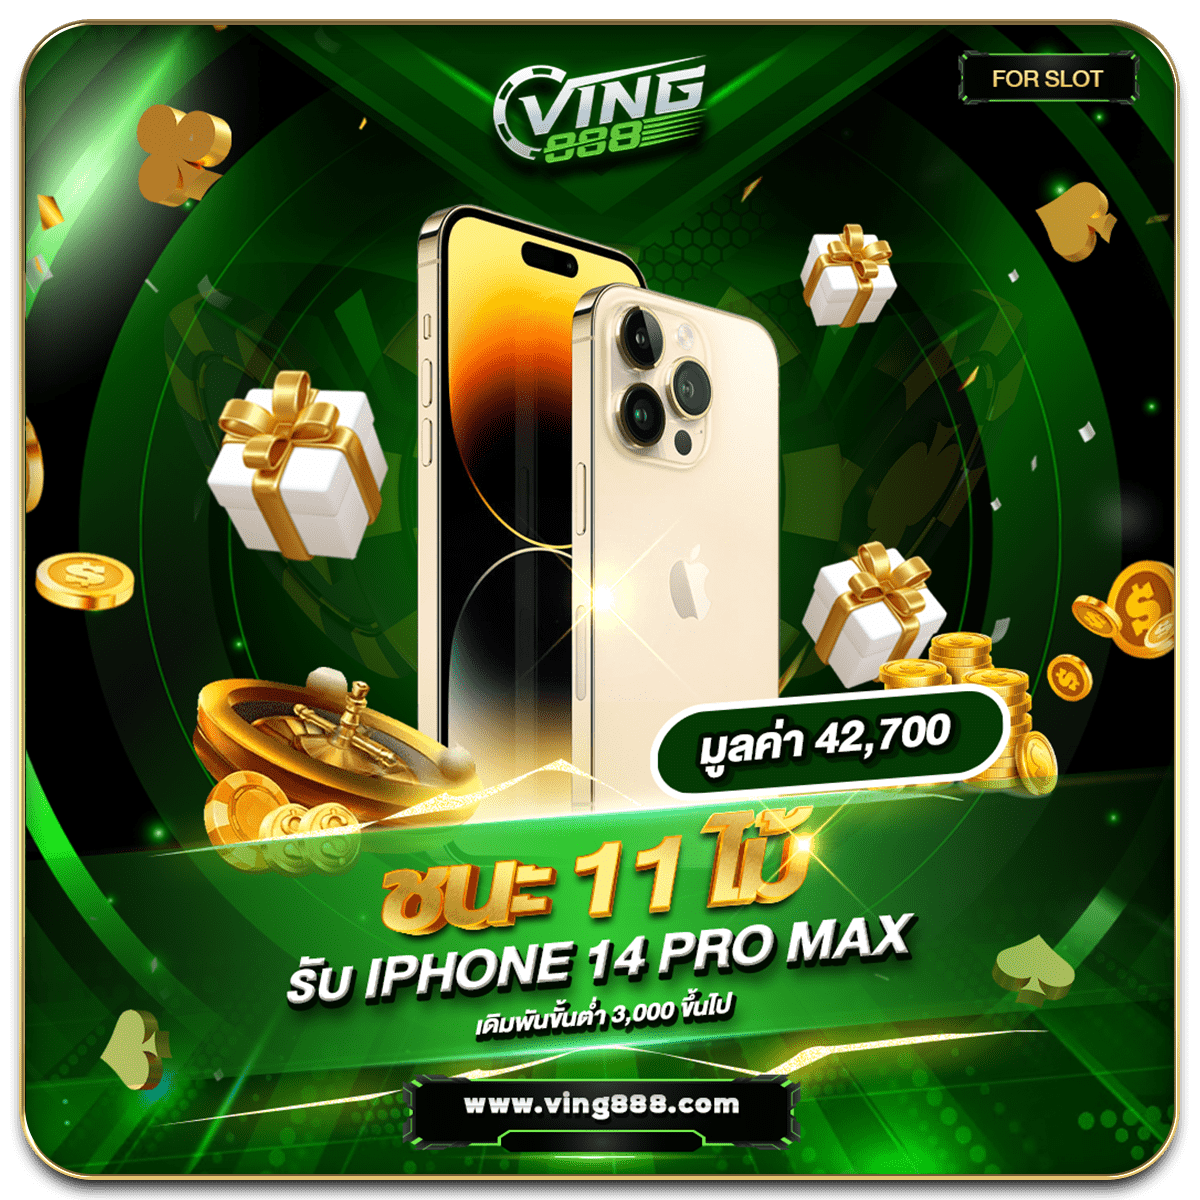 promotion-frame-ชนะ11ไม้-รับIPHONE14PROMAX)